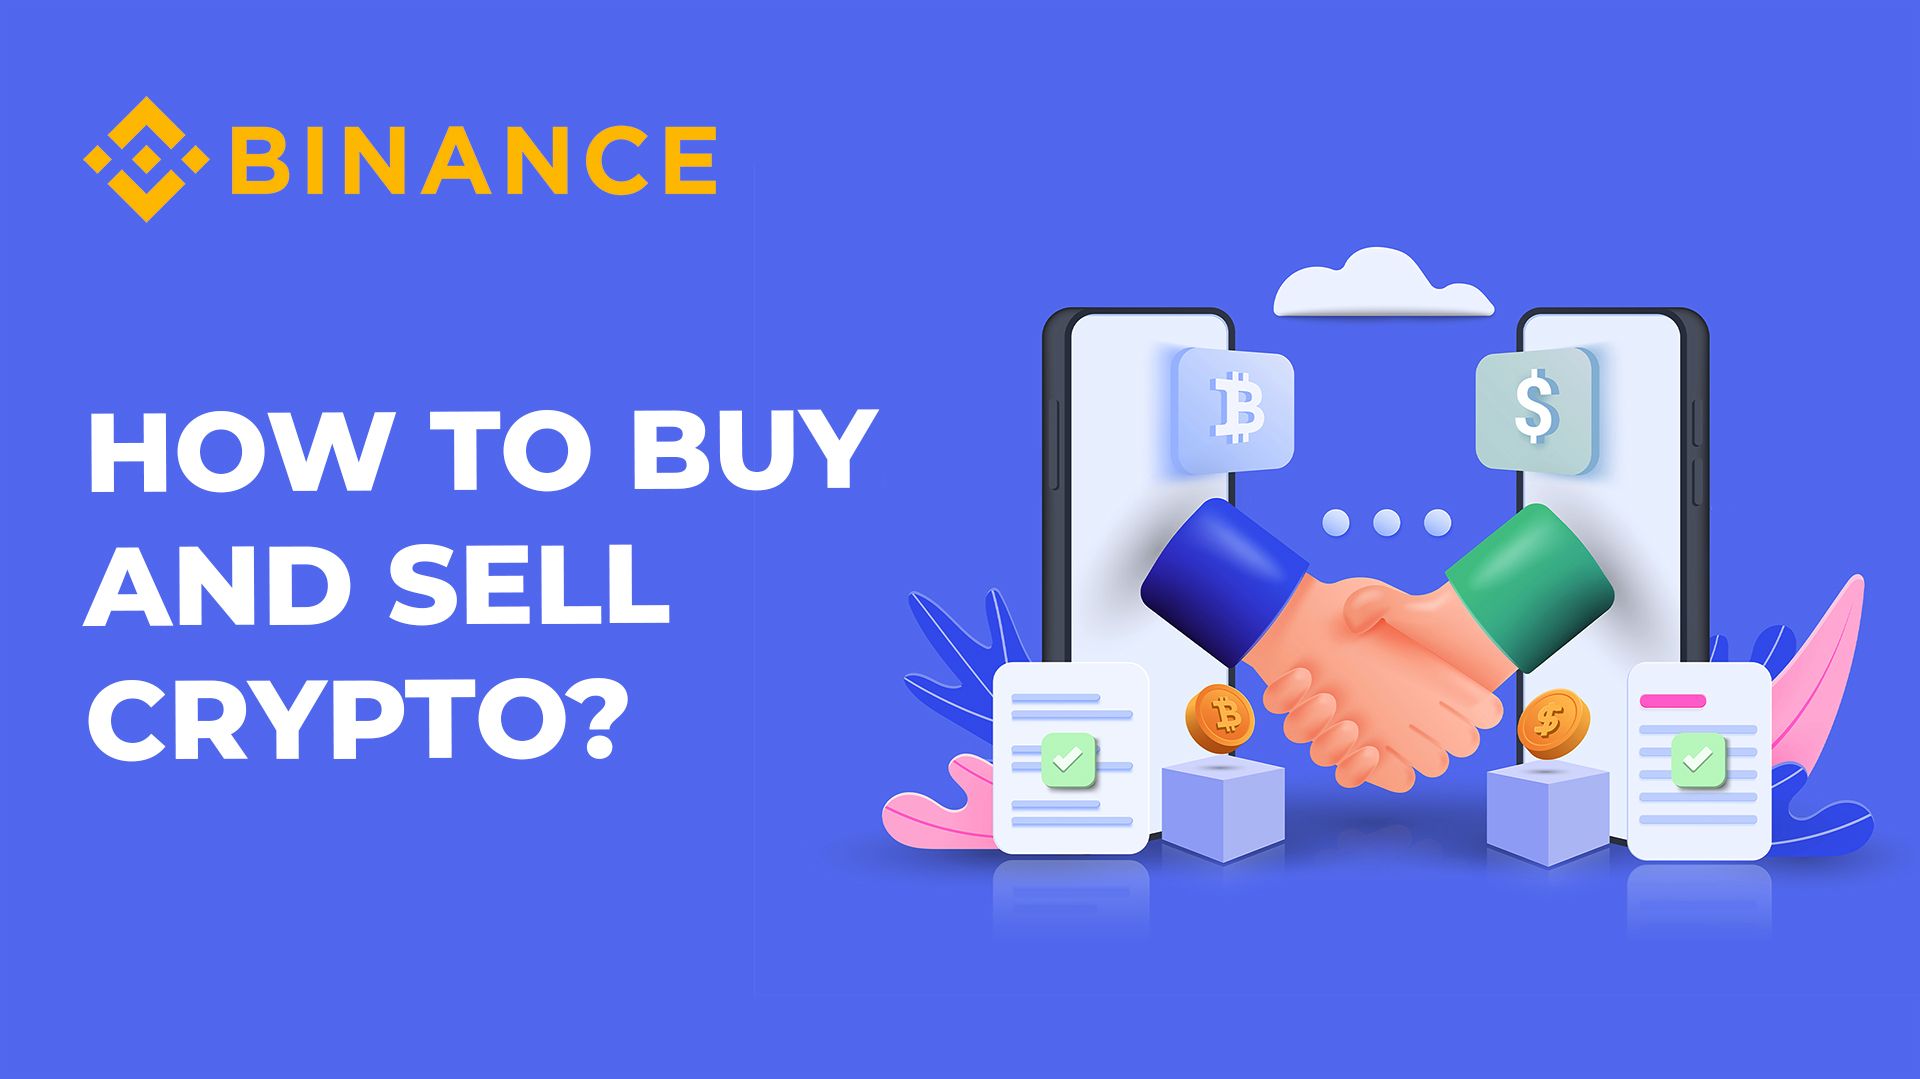 Binance. How to buy cryptocurrency using P2P trading and a bank card at the Binance crypto exchange?